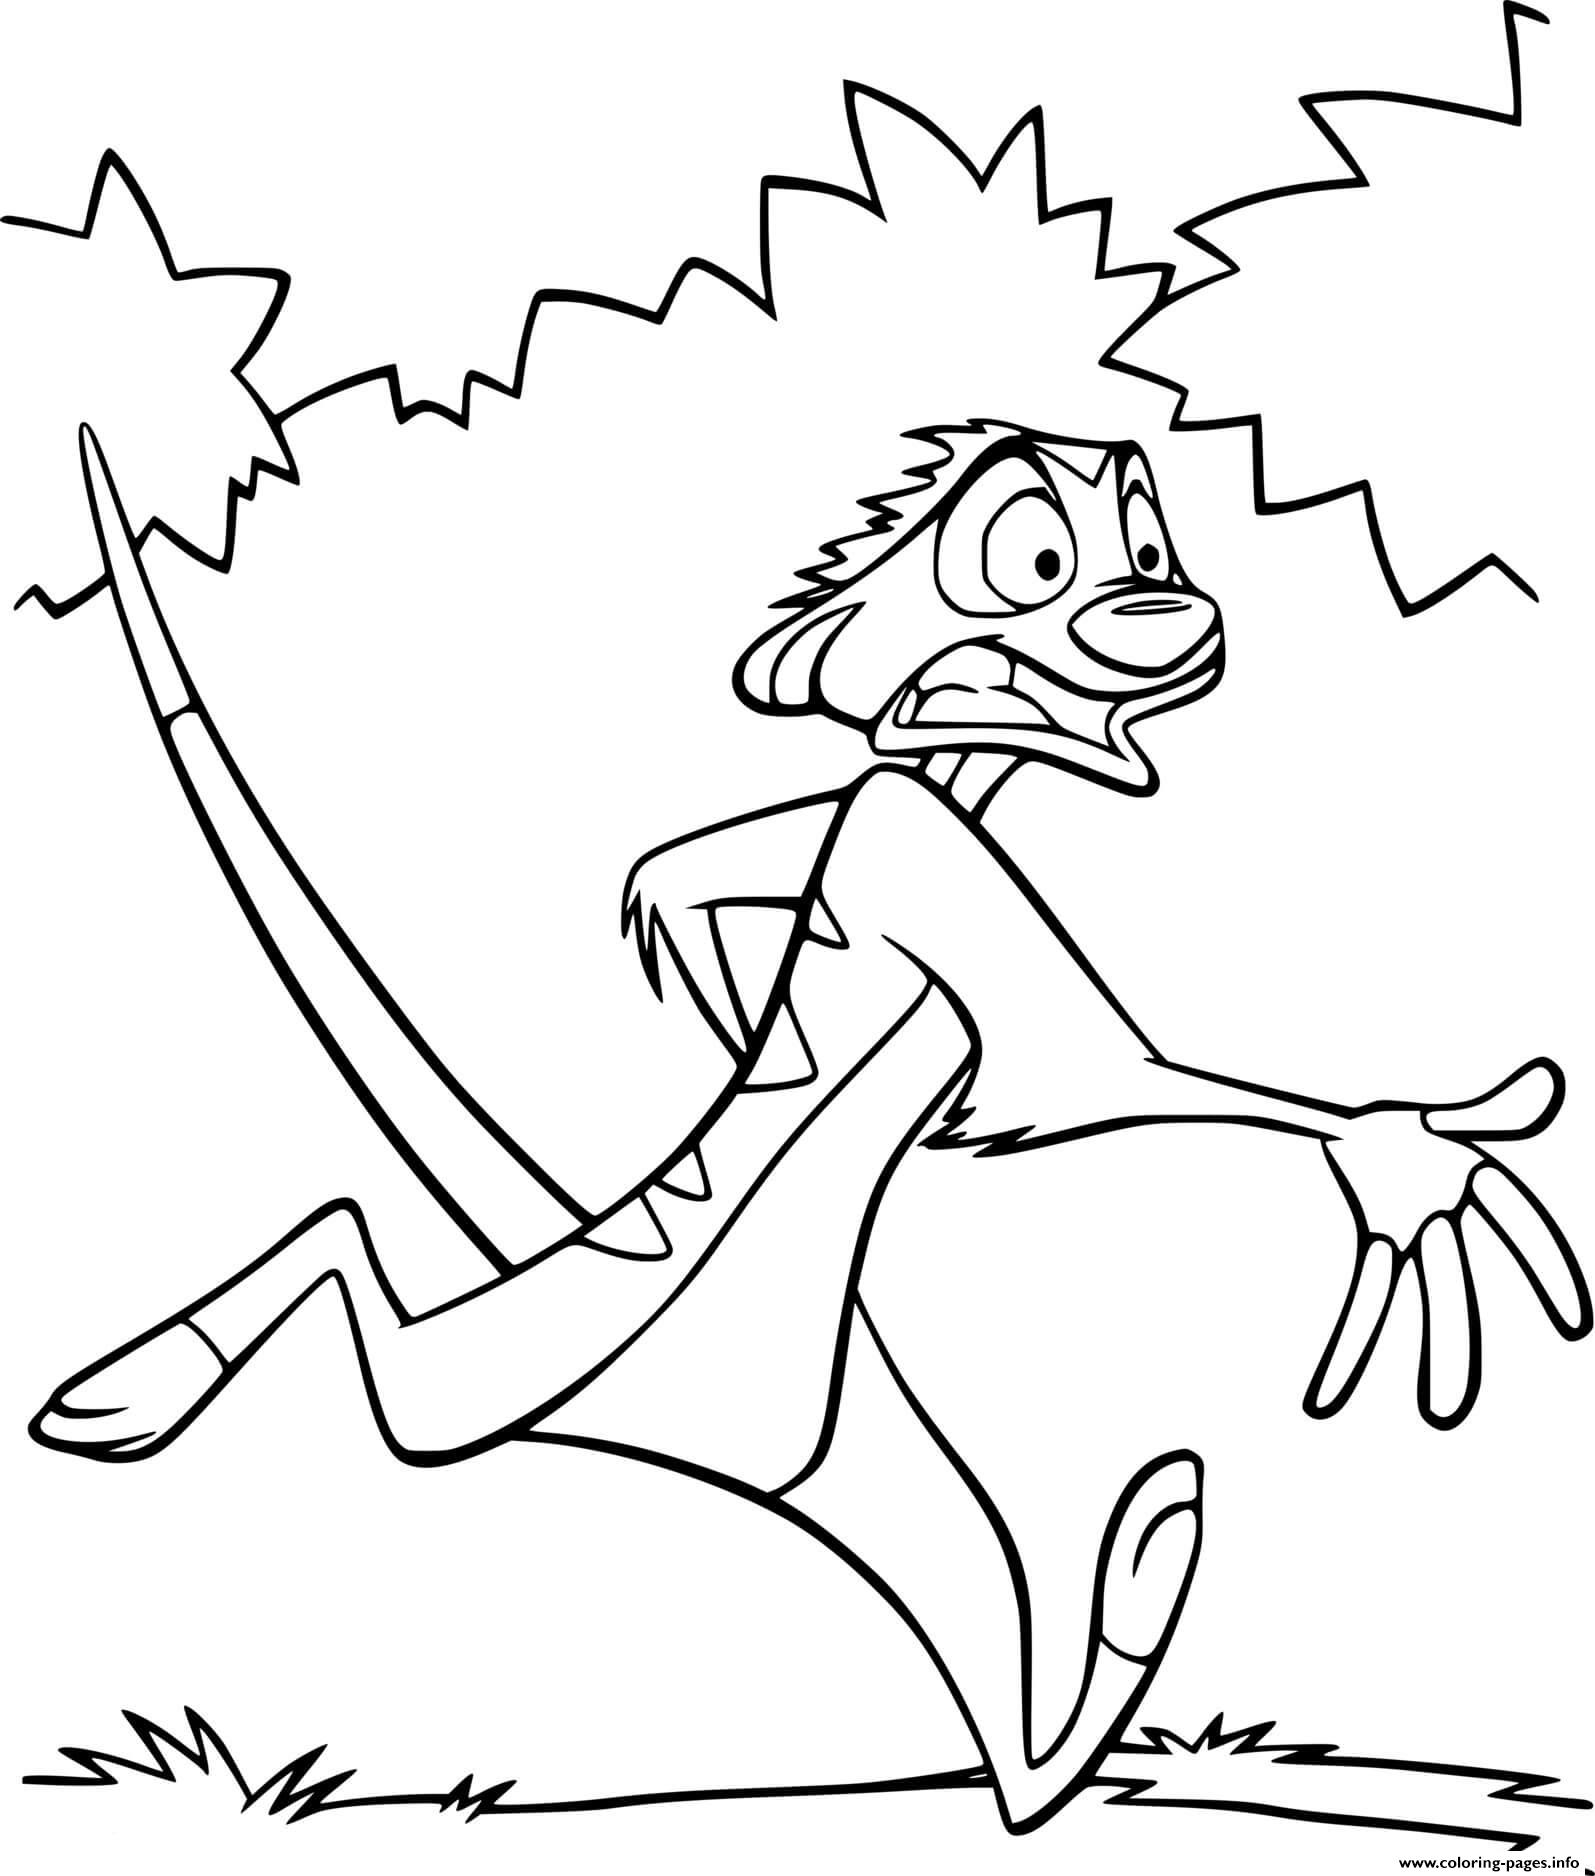 Timon Running coloring